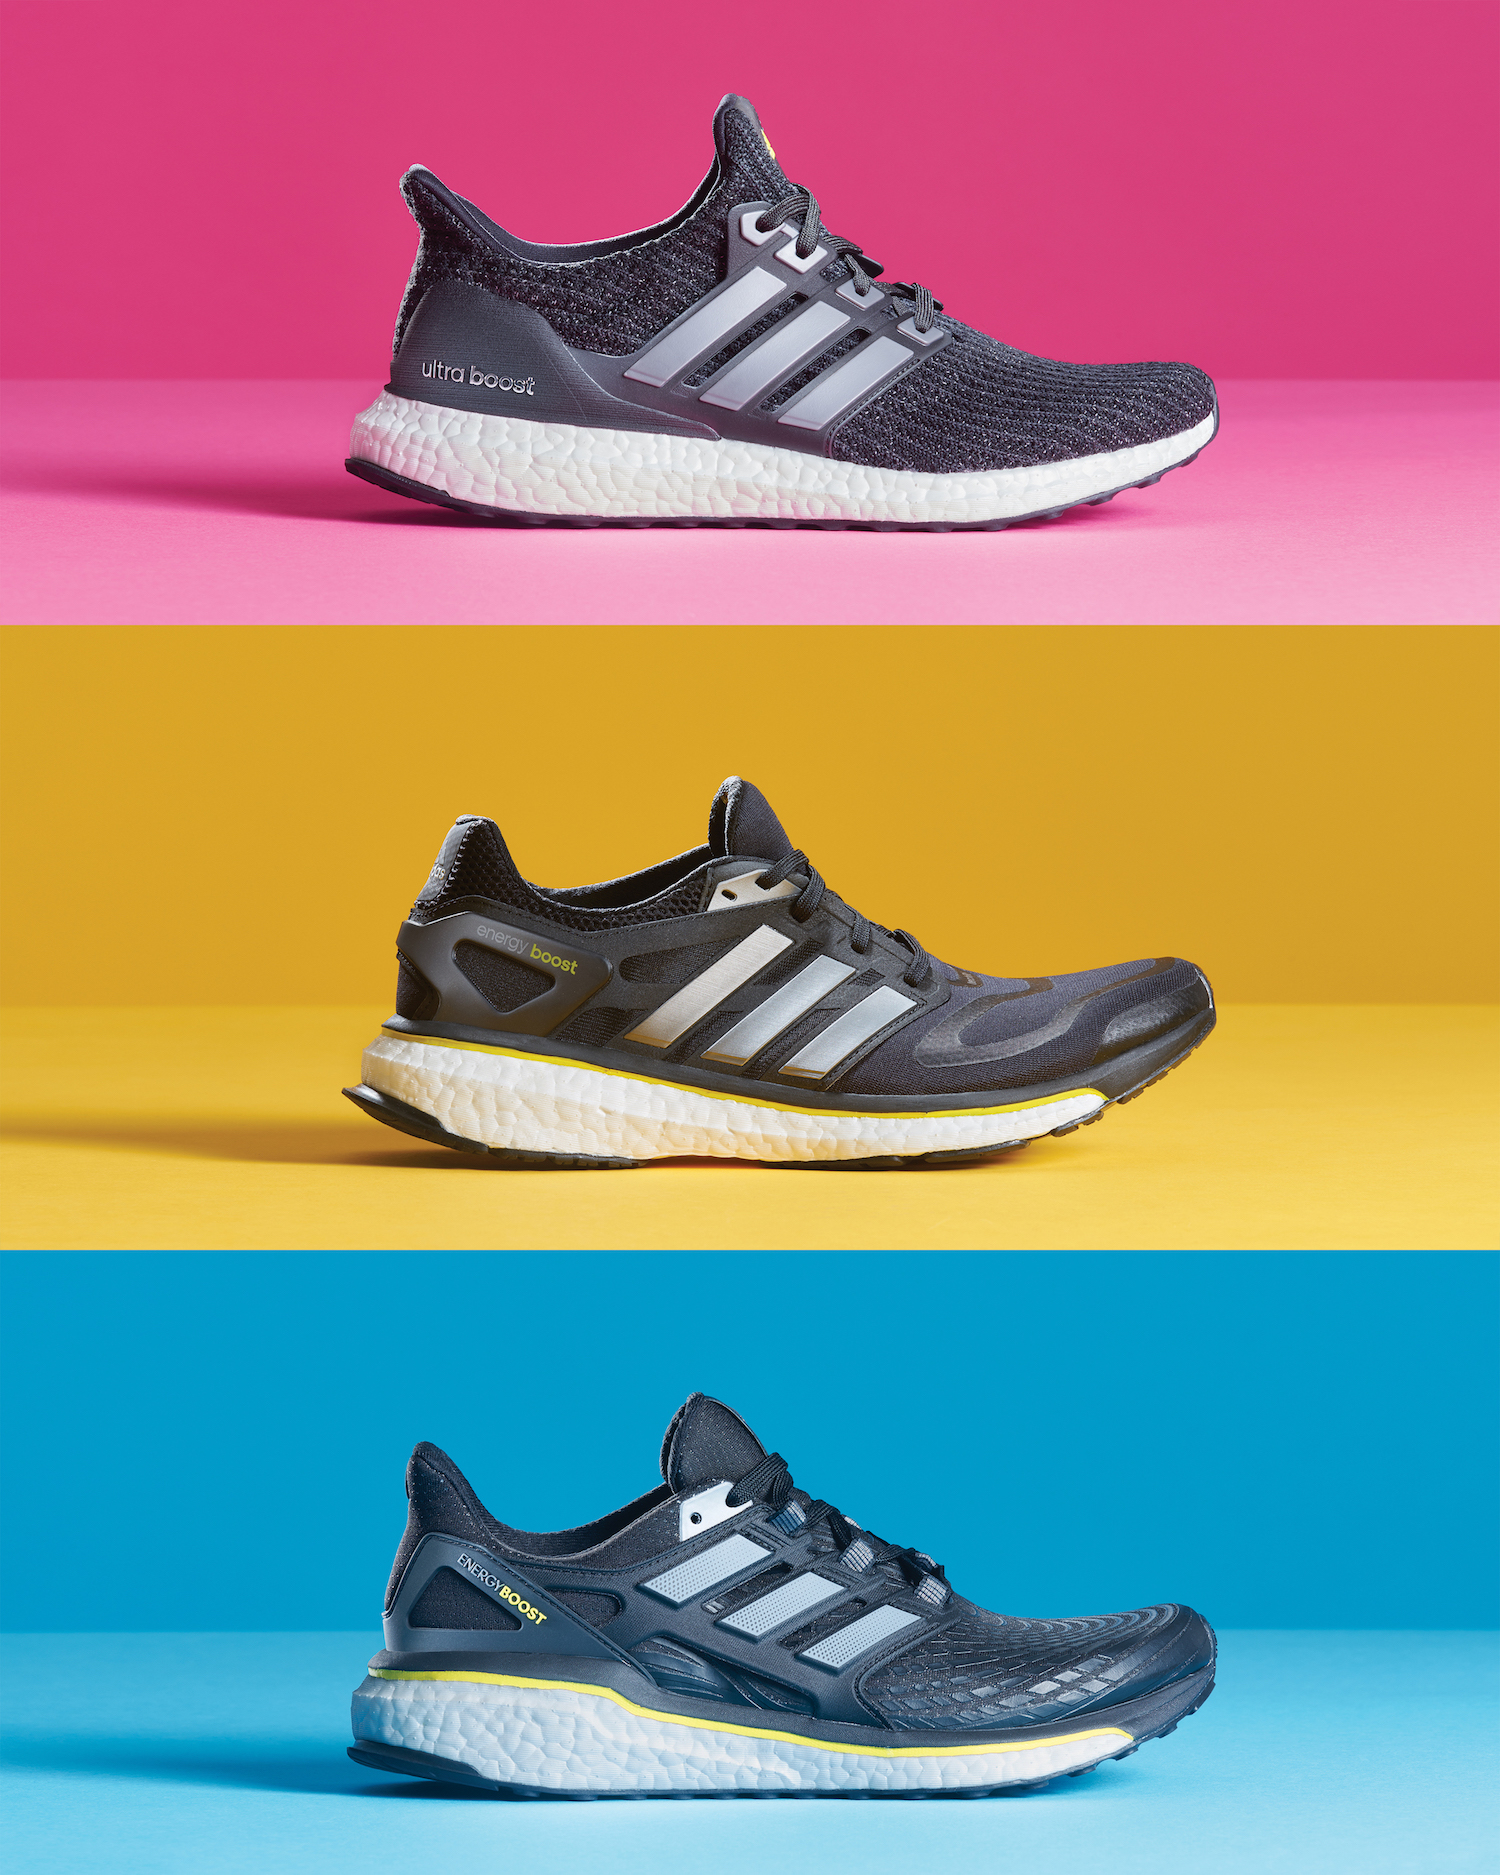 adidas to Re-Release Three Original Boost Models in Anniversary Pack ...